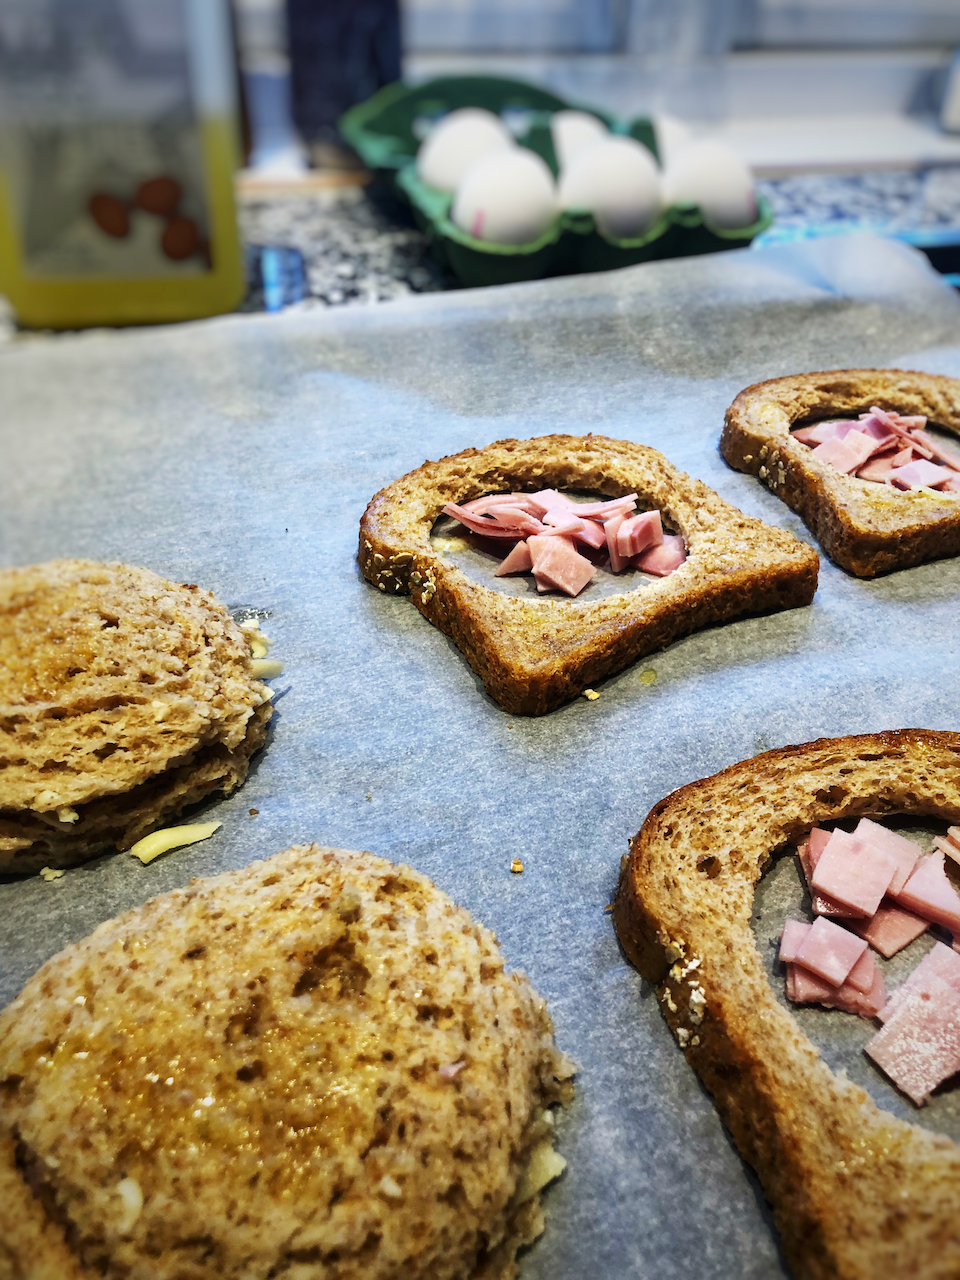 Cut up the rest of the ham and put in in the middle of the 2 bread slices (on top of each other) on a baking sheet